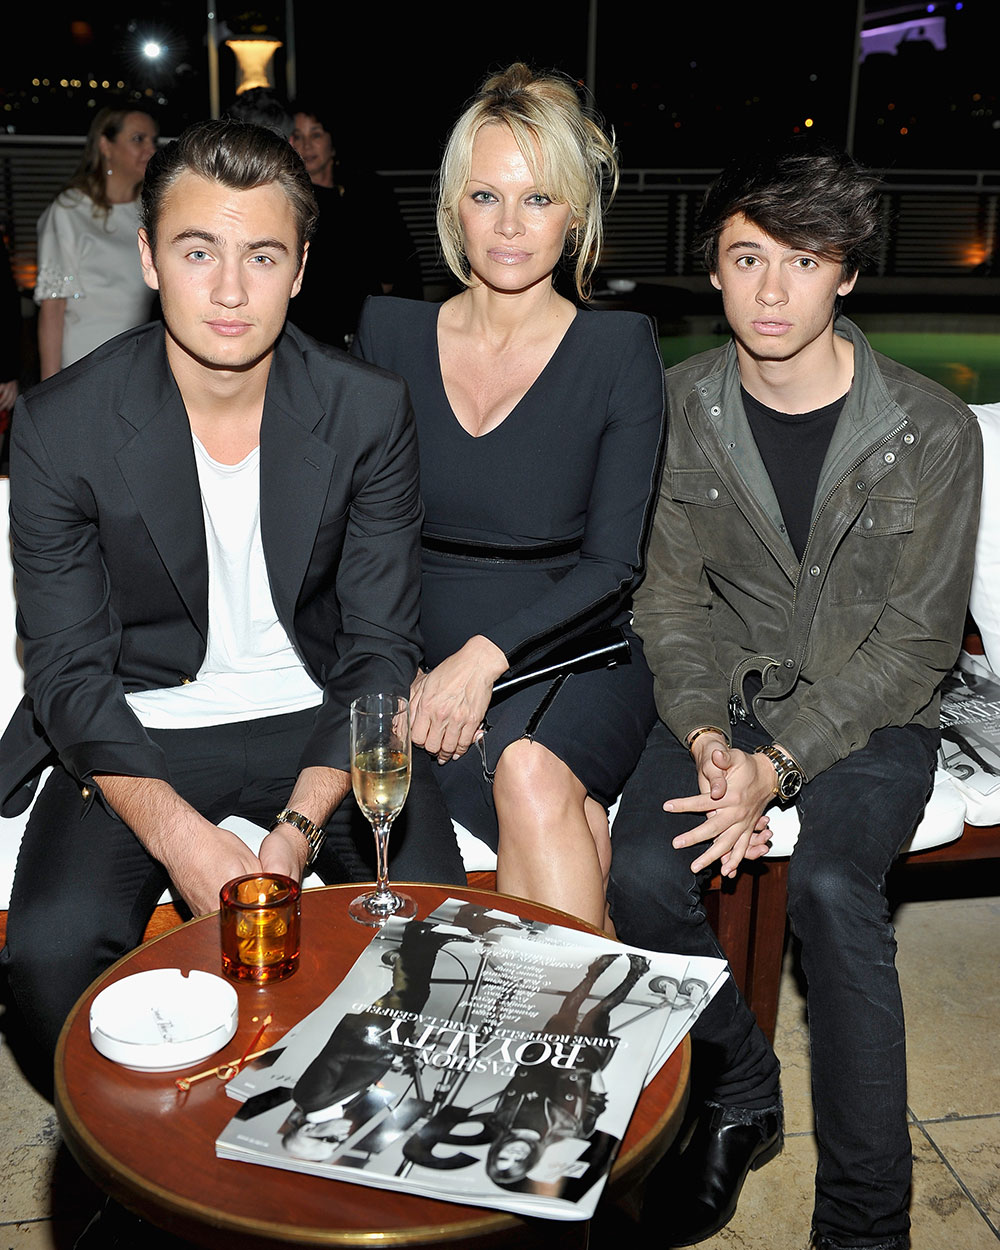 All grown up - Pamela Anderson's boys Brandon Thomas Lee (L) and Dylan Jagger Lee.